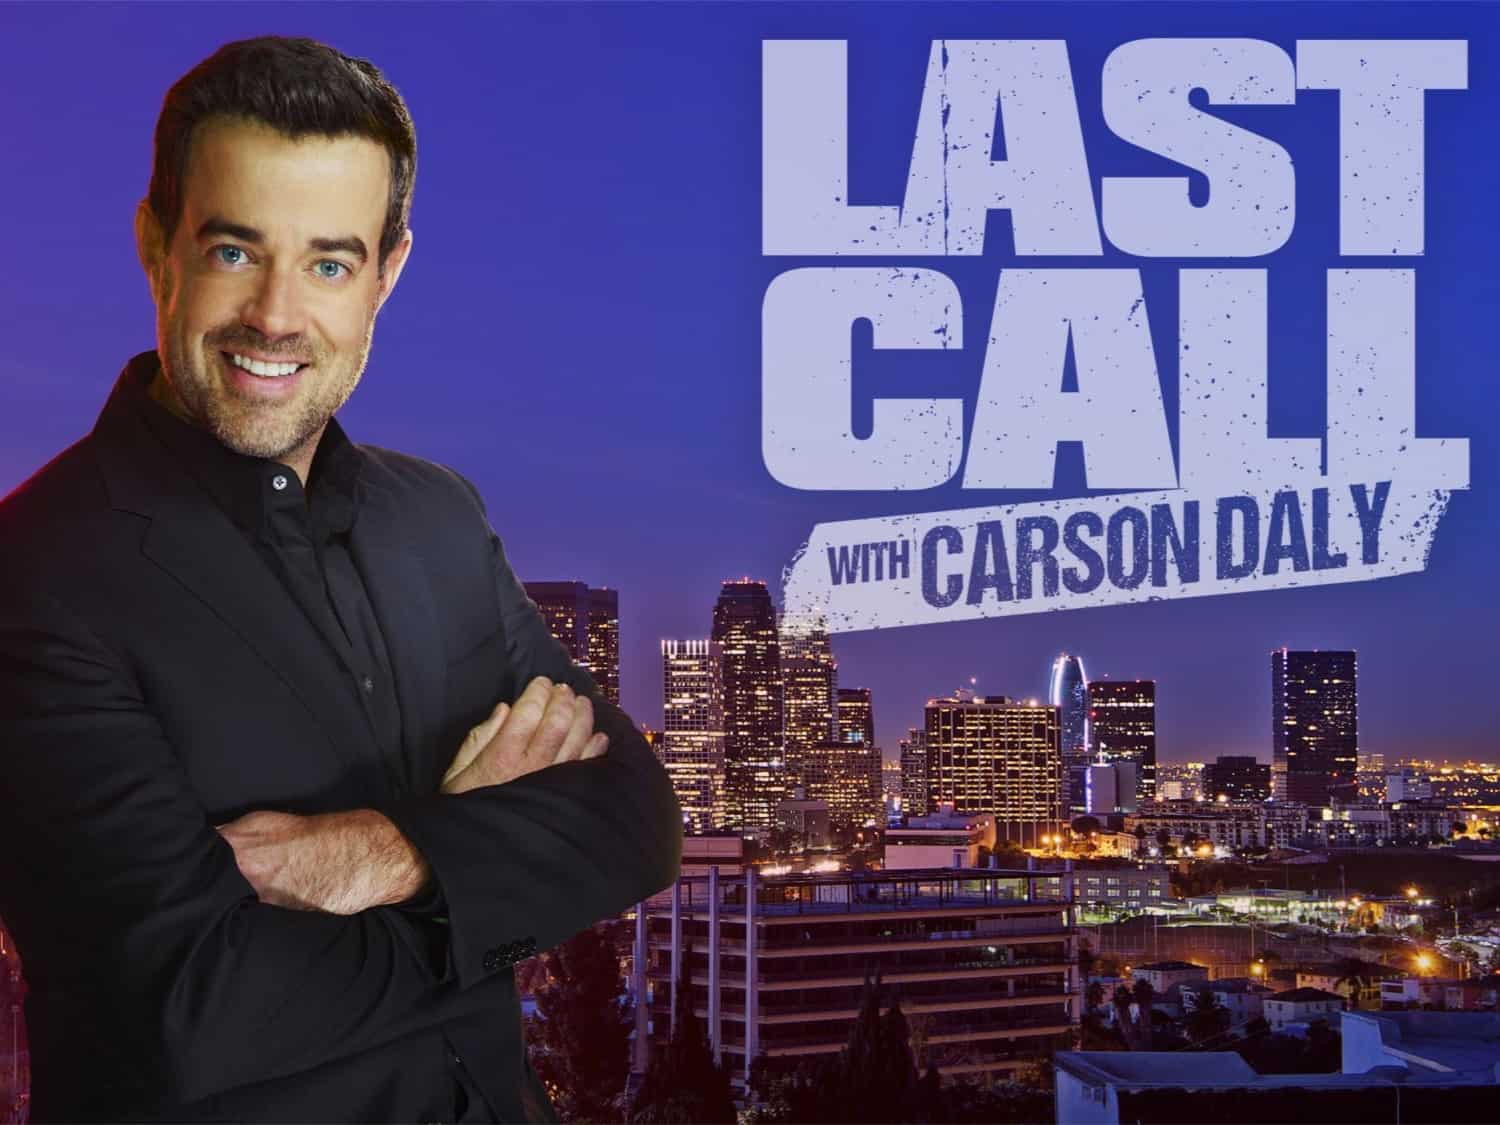 In 2002, "Last Call with Carson Daly" made its debut